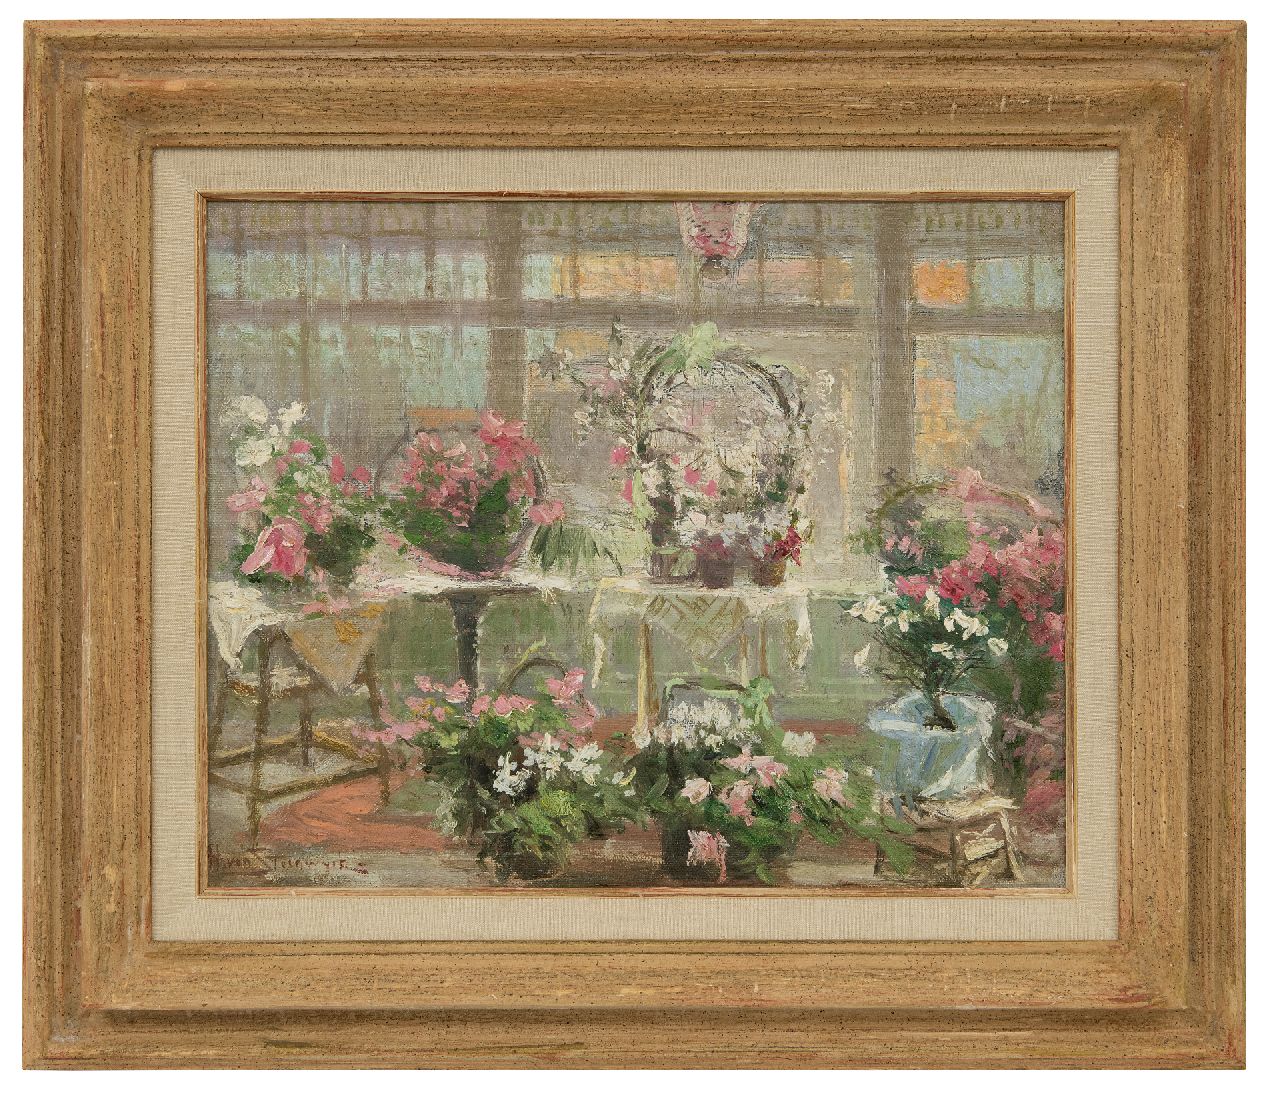 Steenwijk H. van | Hendrik van Steenwijk | Paintings offered for sale | Conservatory, oil on canvas laid down on panel 29.9 x 36.8 cm, signed l.l.